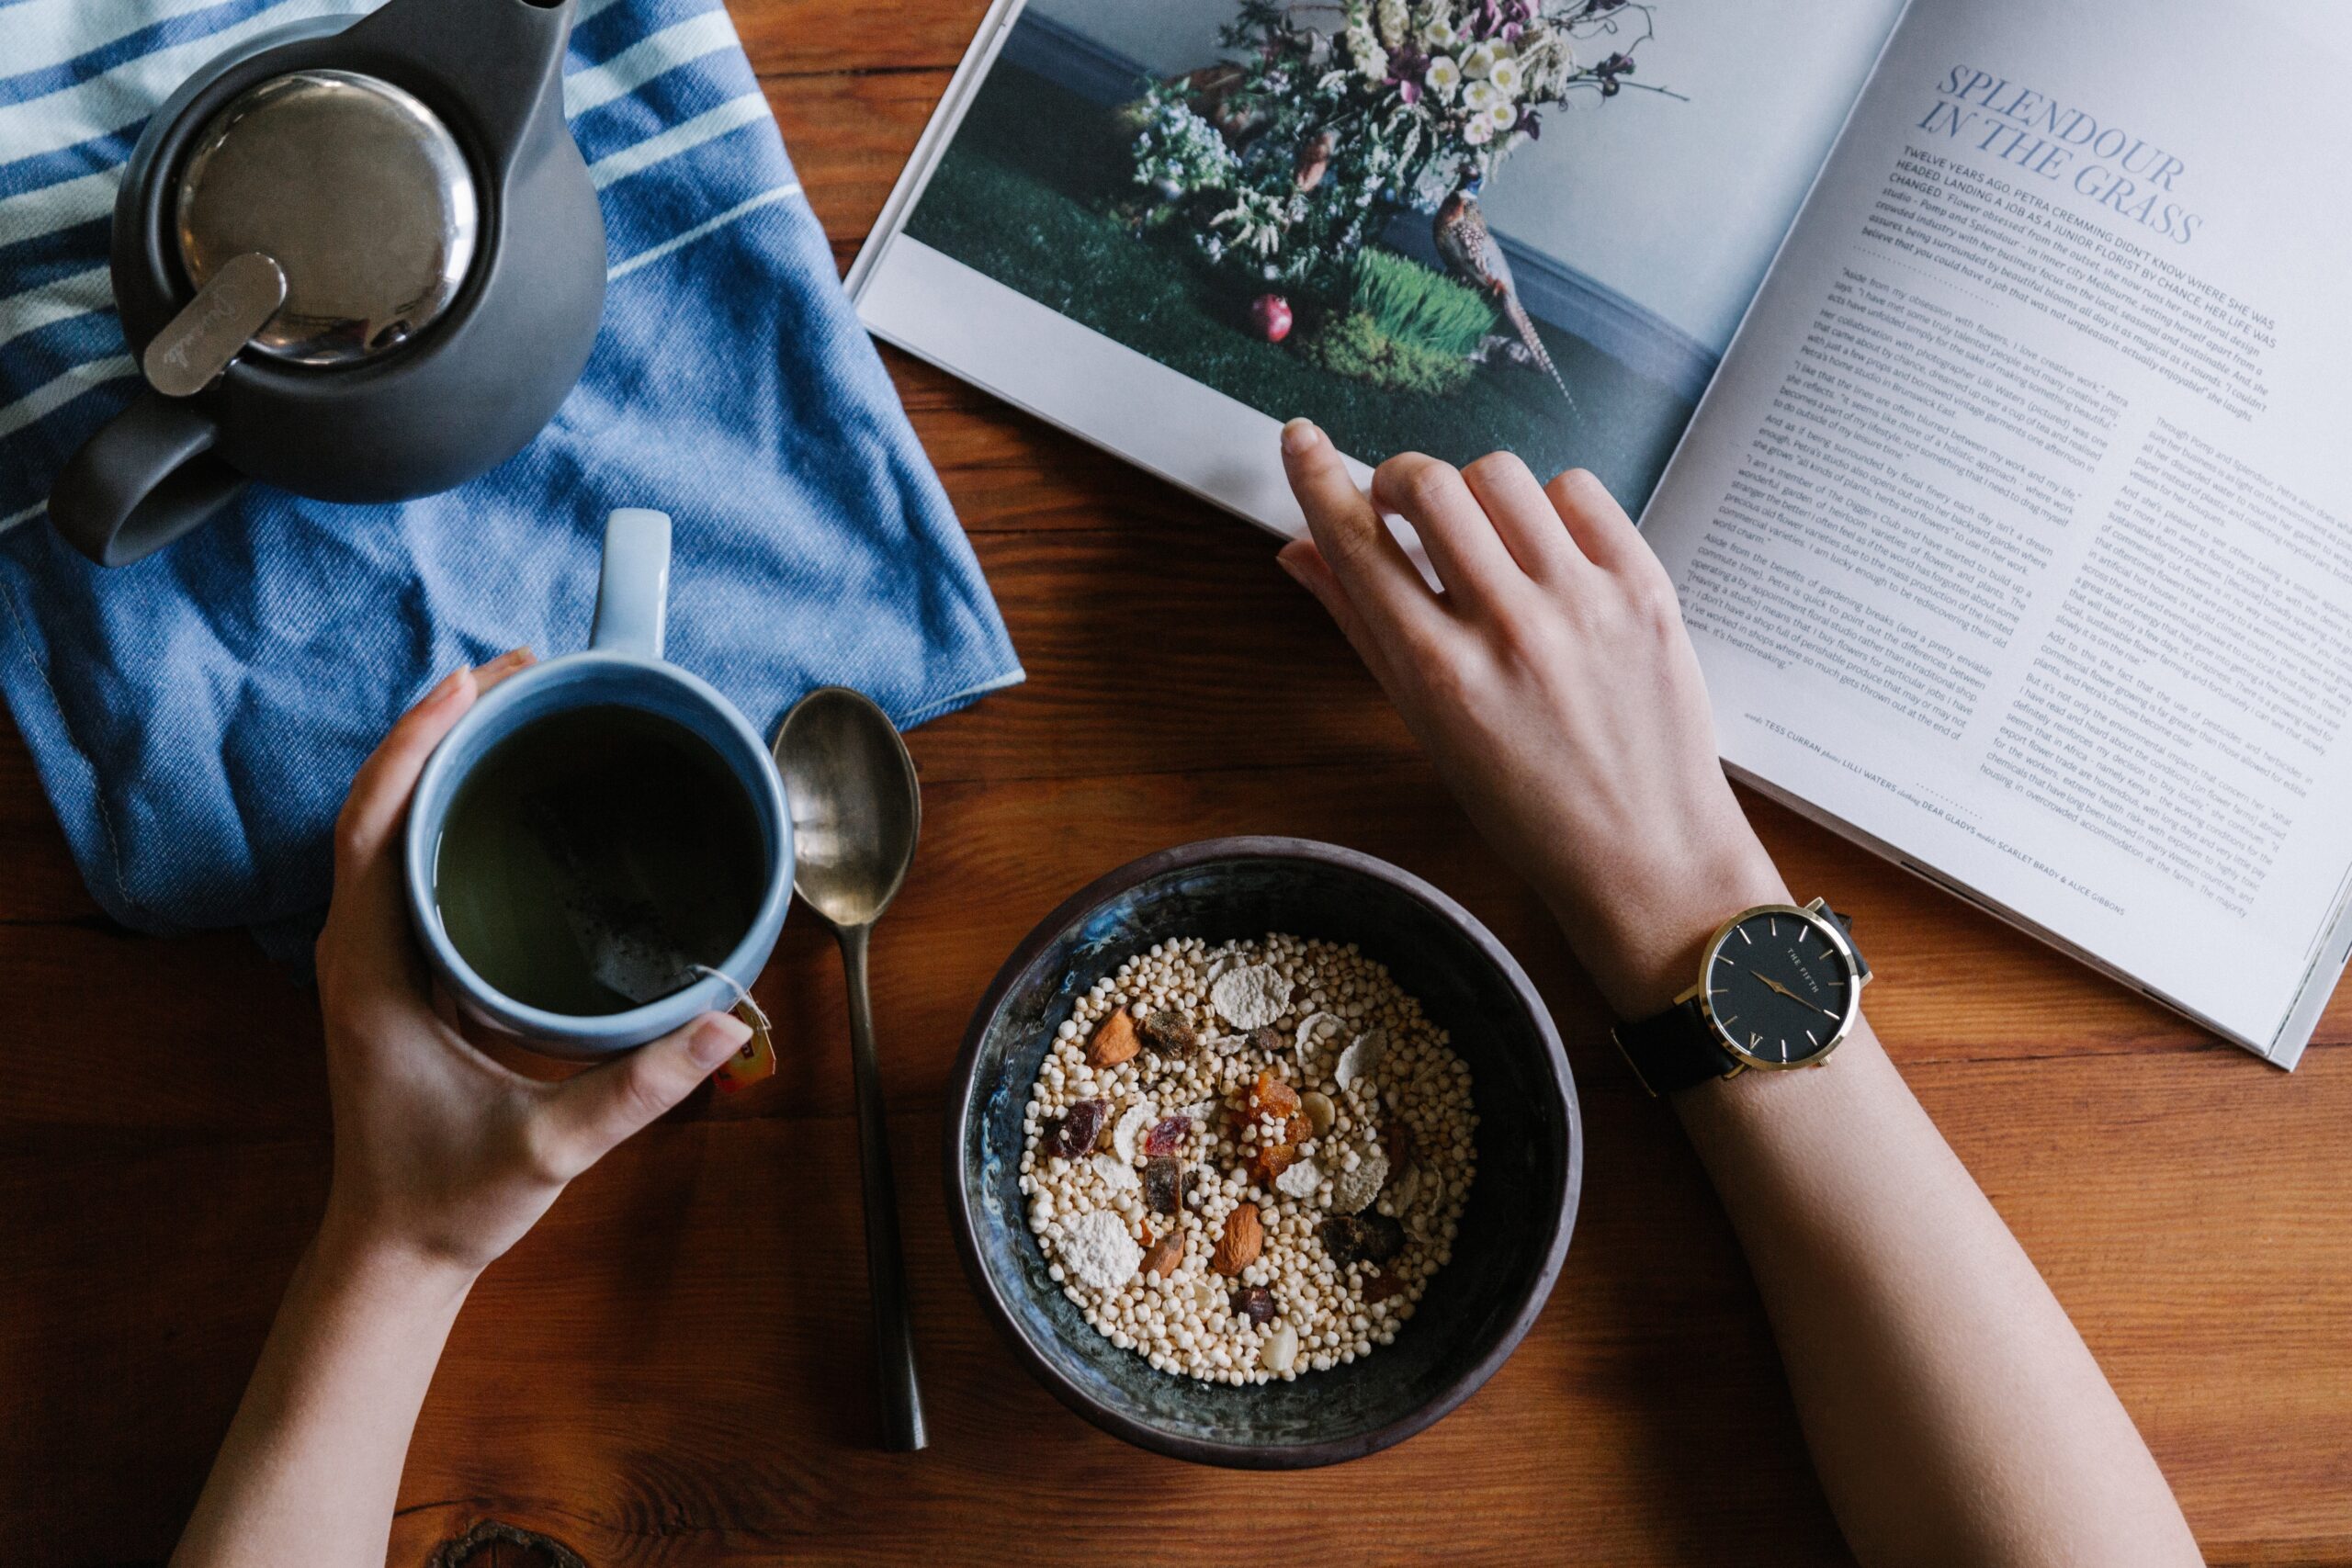 A person holding a coffee cup and enjoying a bowl of cereal while reading a book.